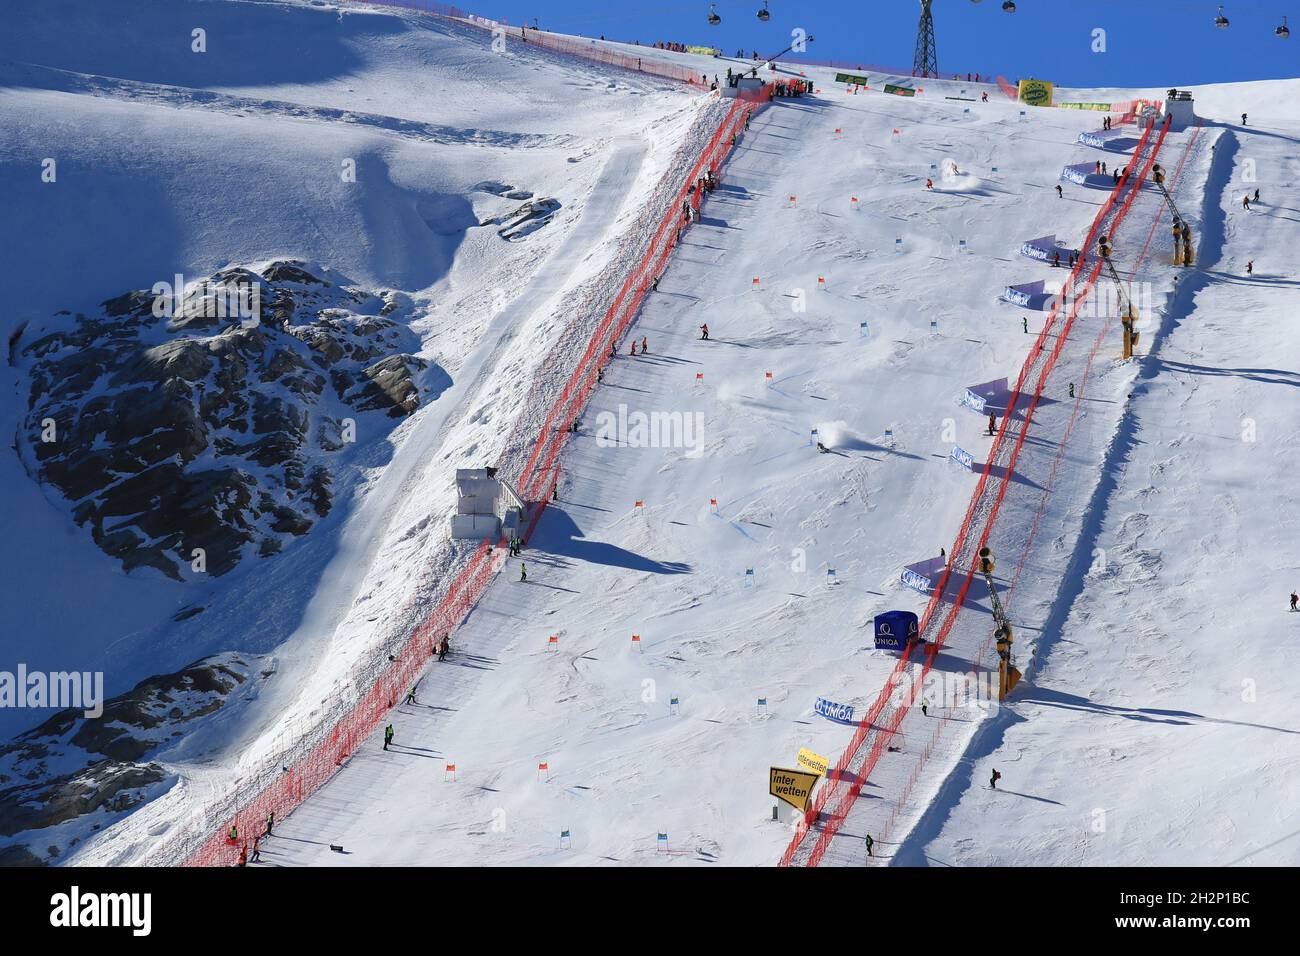 Solden, Austria. 23rd Oct, 2021. Alpine Ski World Cup 2021-2022: 1st Women Giant Slalom opening race as part of the Alpine Ski World Cup in Solden on October 23, 2021; A skier in action on the slope of the glacier (Photo by Pierre Teyssot/ESPA-Images) Credit: European Sports Photo Agency/Alamy Live News Stock Photo